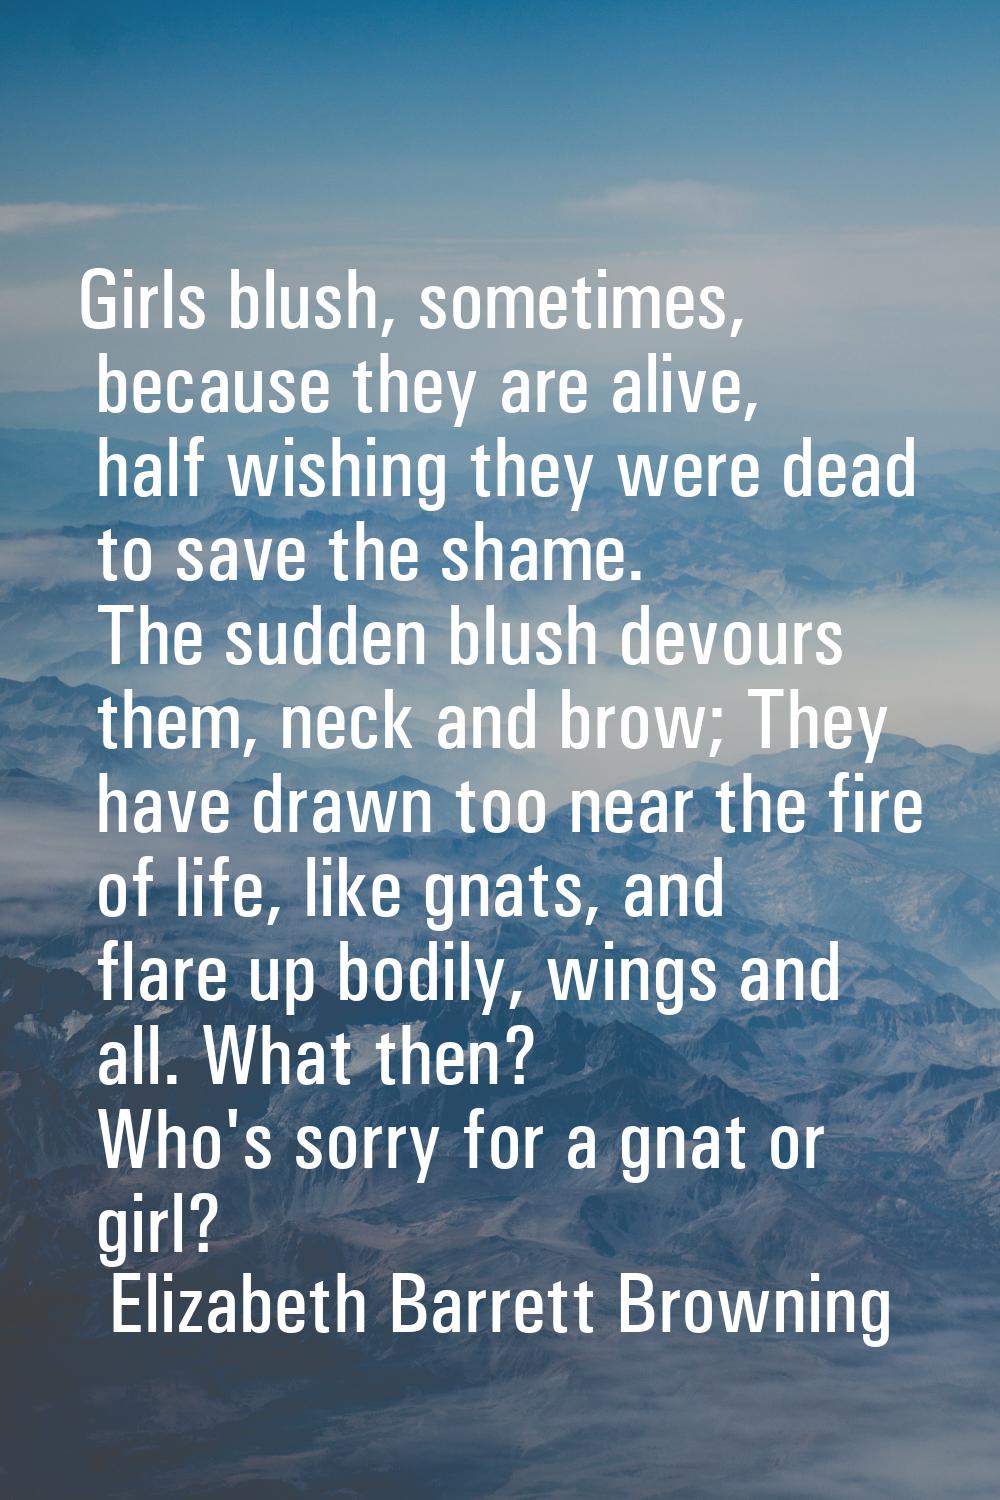 Girls blush, sometimes, because they are alive, half wishing they were dead to save the shame. The 